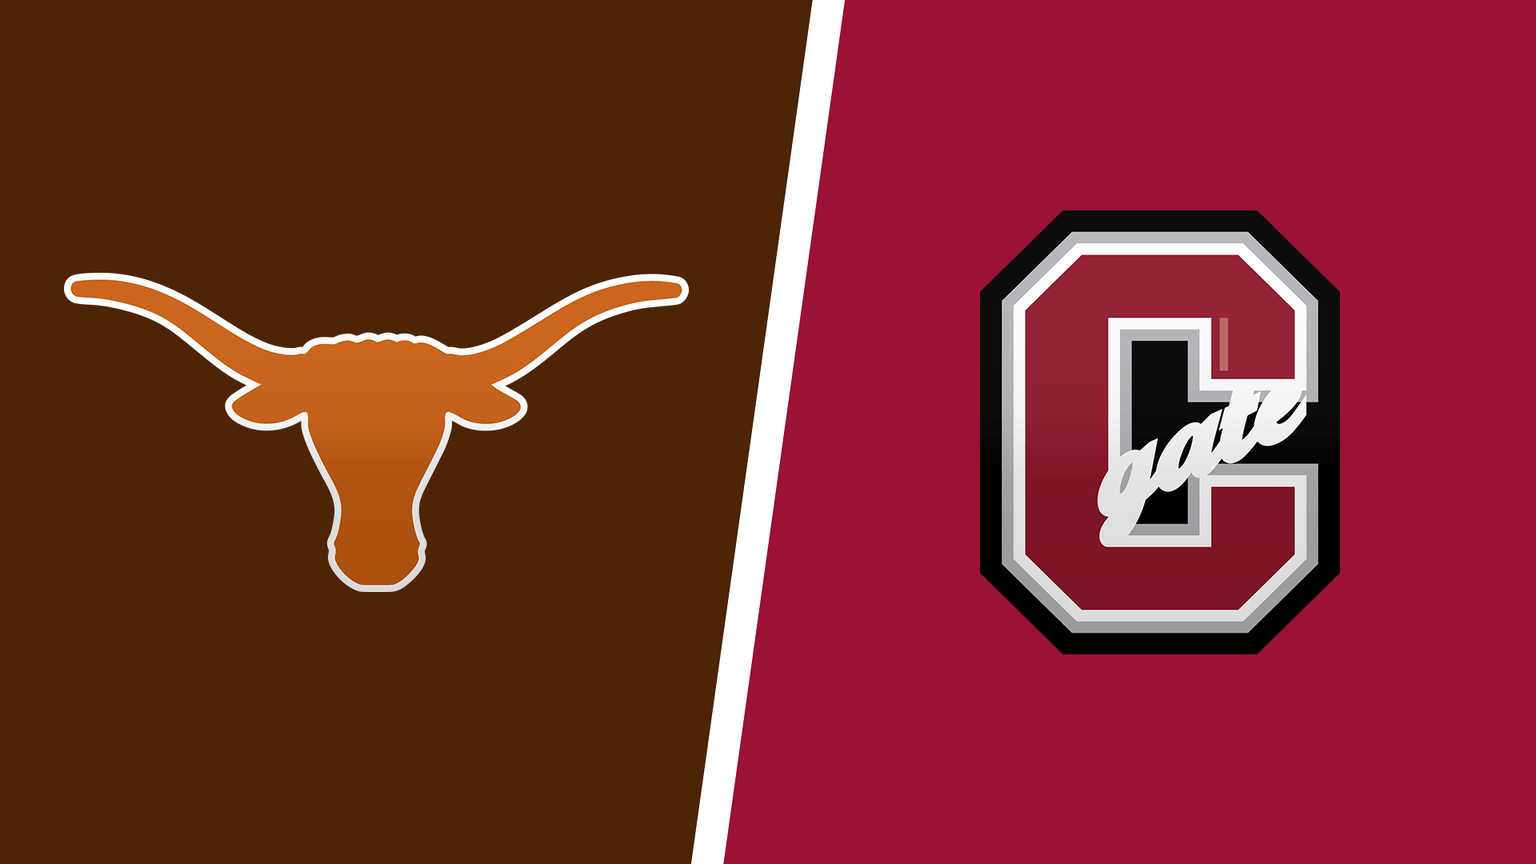 How to Watch Colgate vs. Texas Game Live Online on March 16, 2023